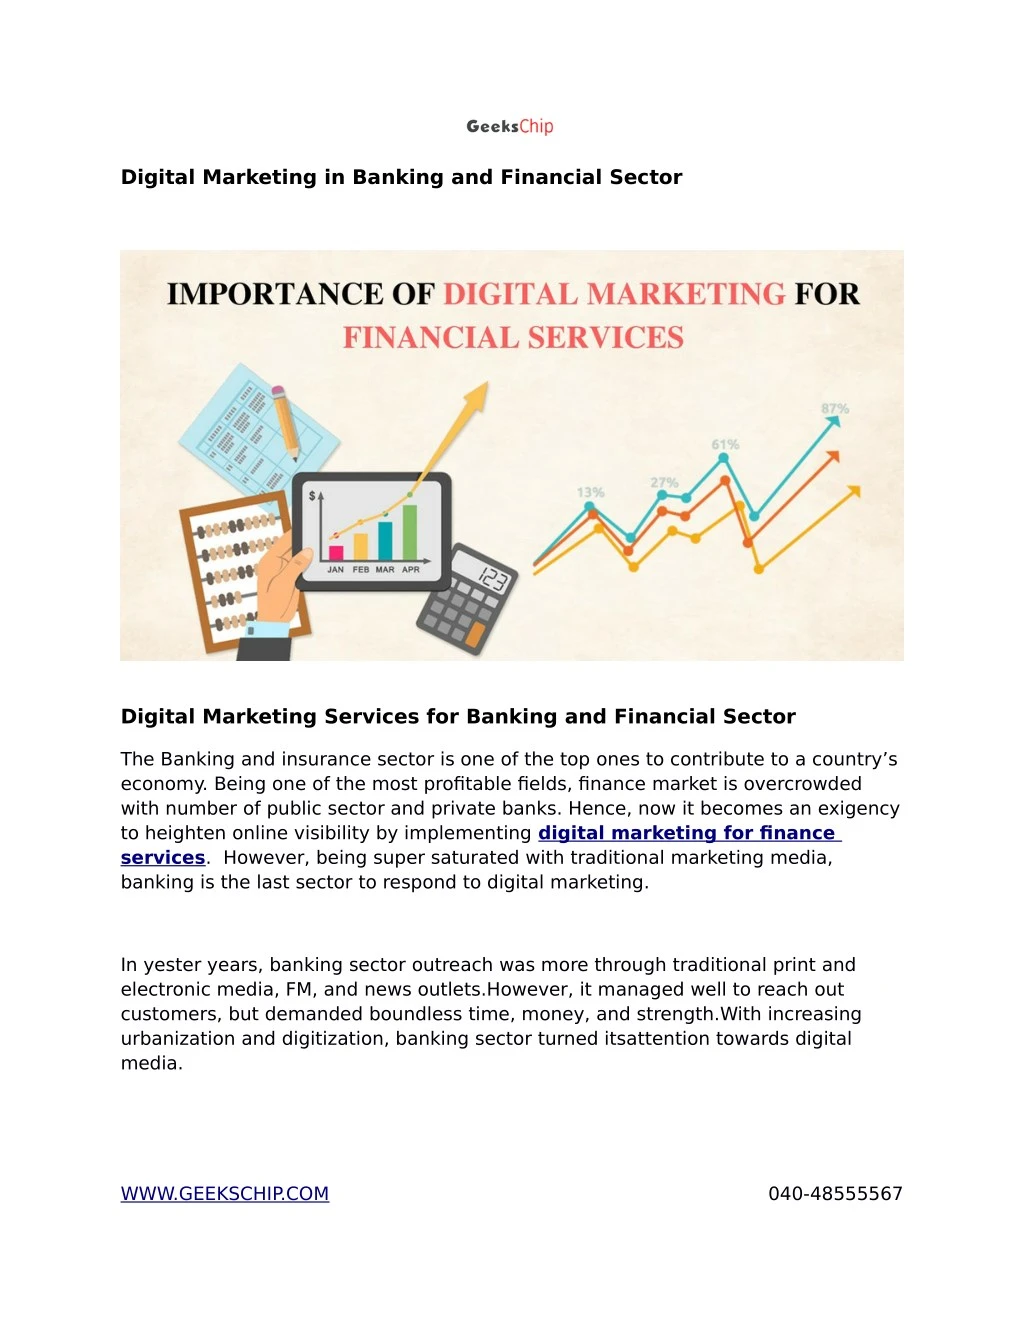 digital marketing in banking and financial sector